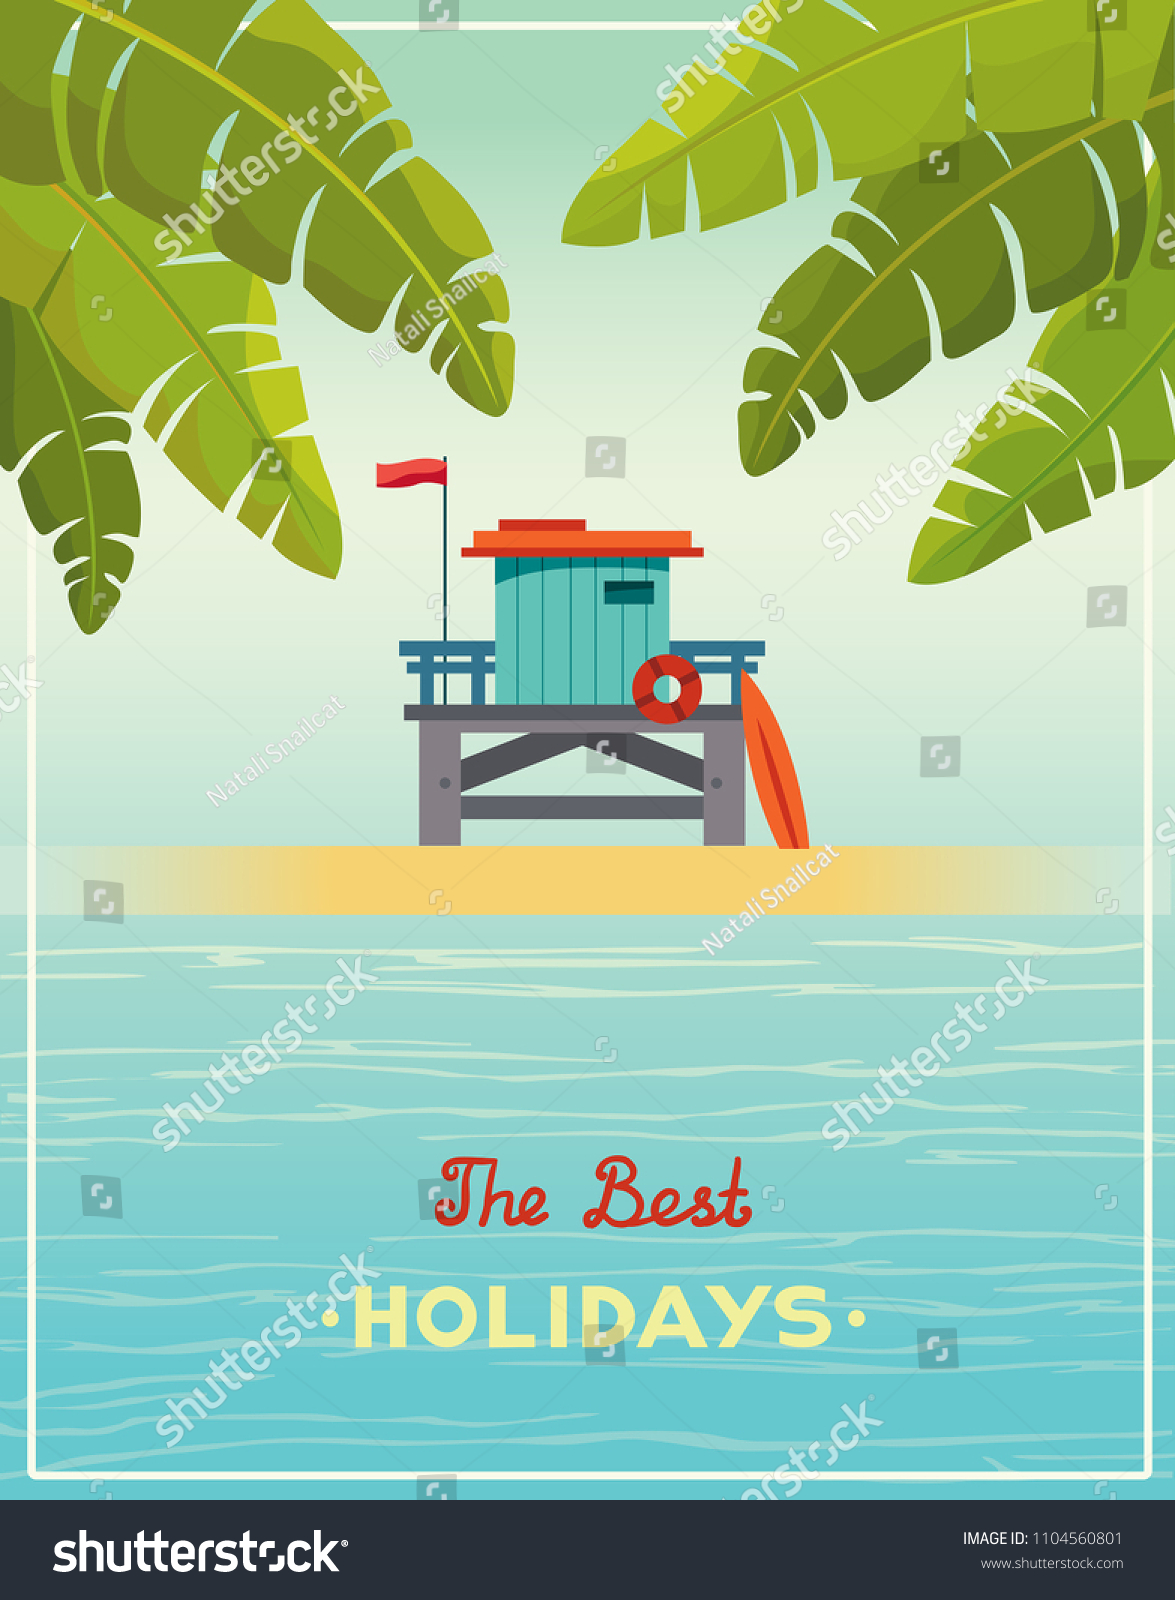 SVG of The best summer holiday - Lifeguard station on a beach with green palm and blue sea. Vector illustration with tropical landscape. svg